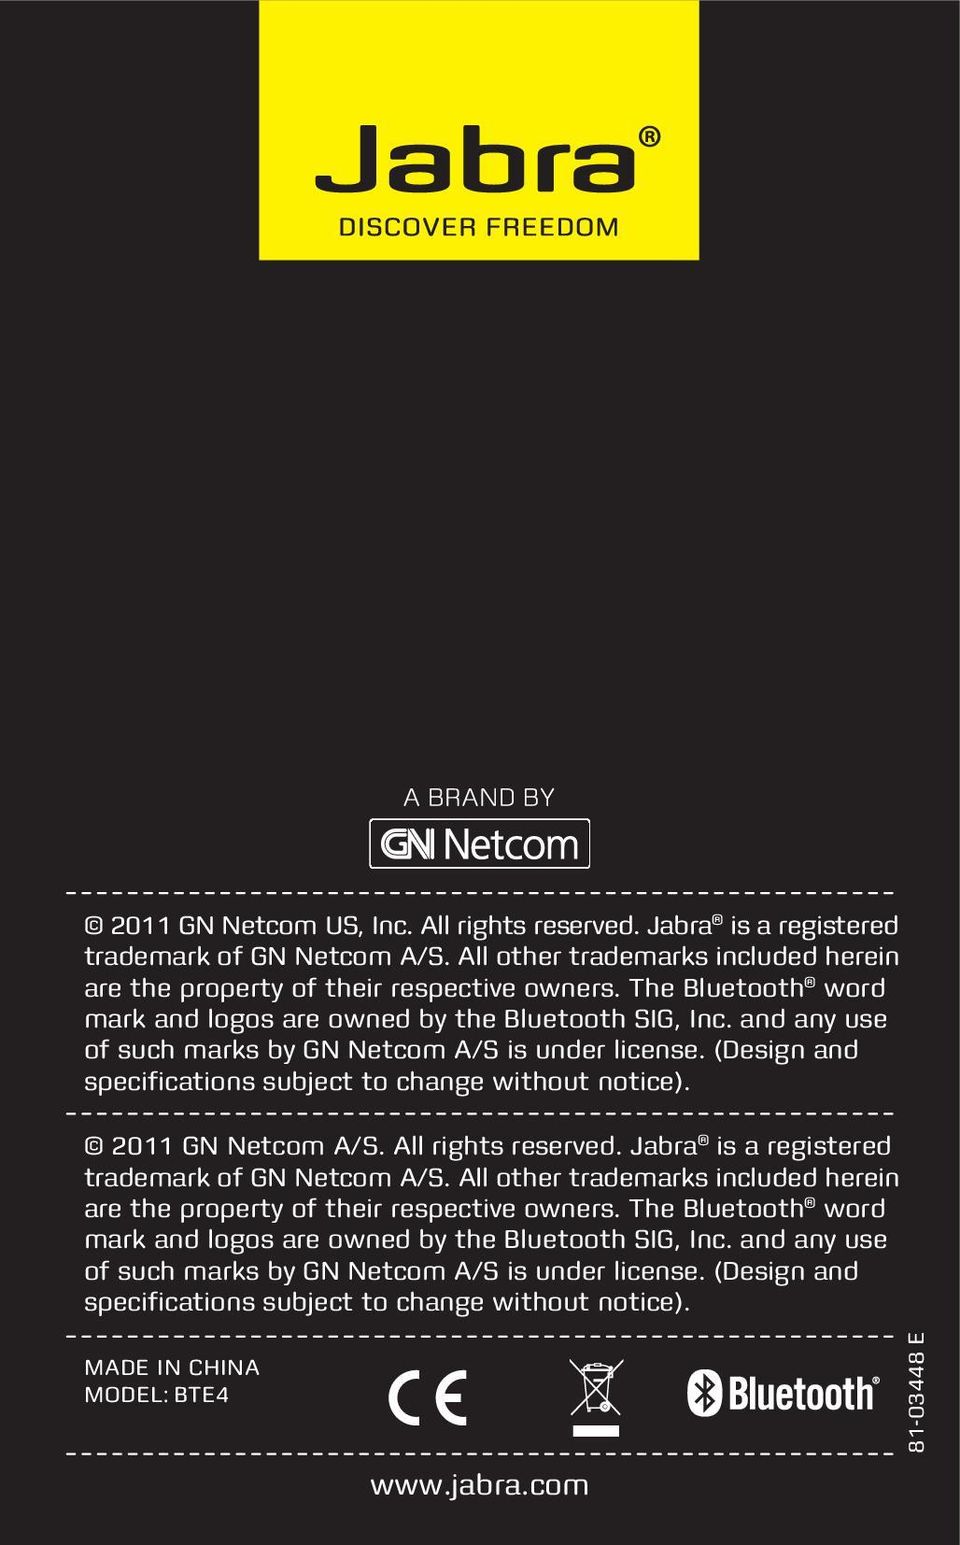 2011 GN Netcom A/S. All rights reserved. Jabra is a registered trademark of GN Netcom A/S. All other trademarks included herein are the property of their respective owners.